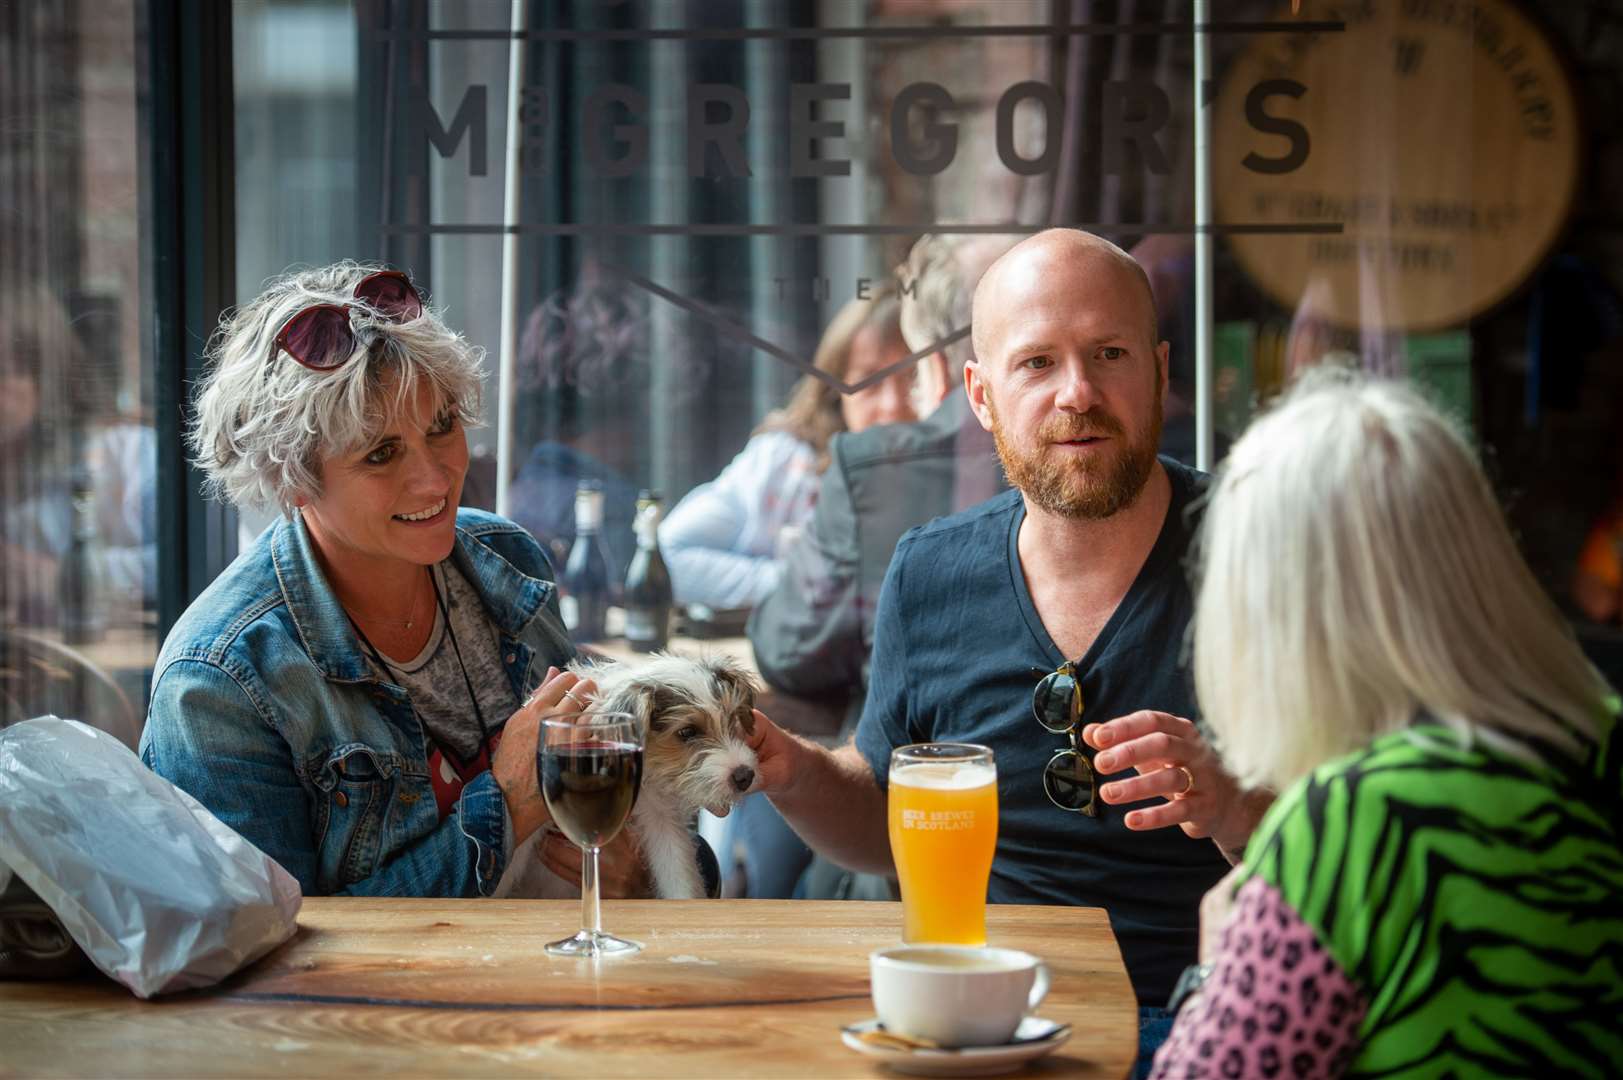 Makeup artist Sam Whitby with husband Keith and Bea the dog at MacGregors bar. Picture: Callum Mackay.